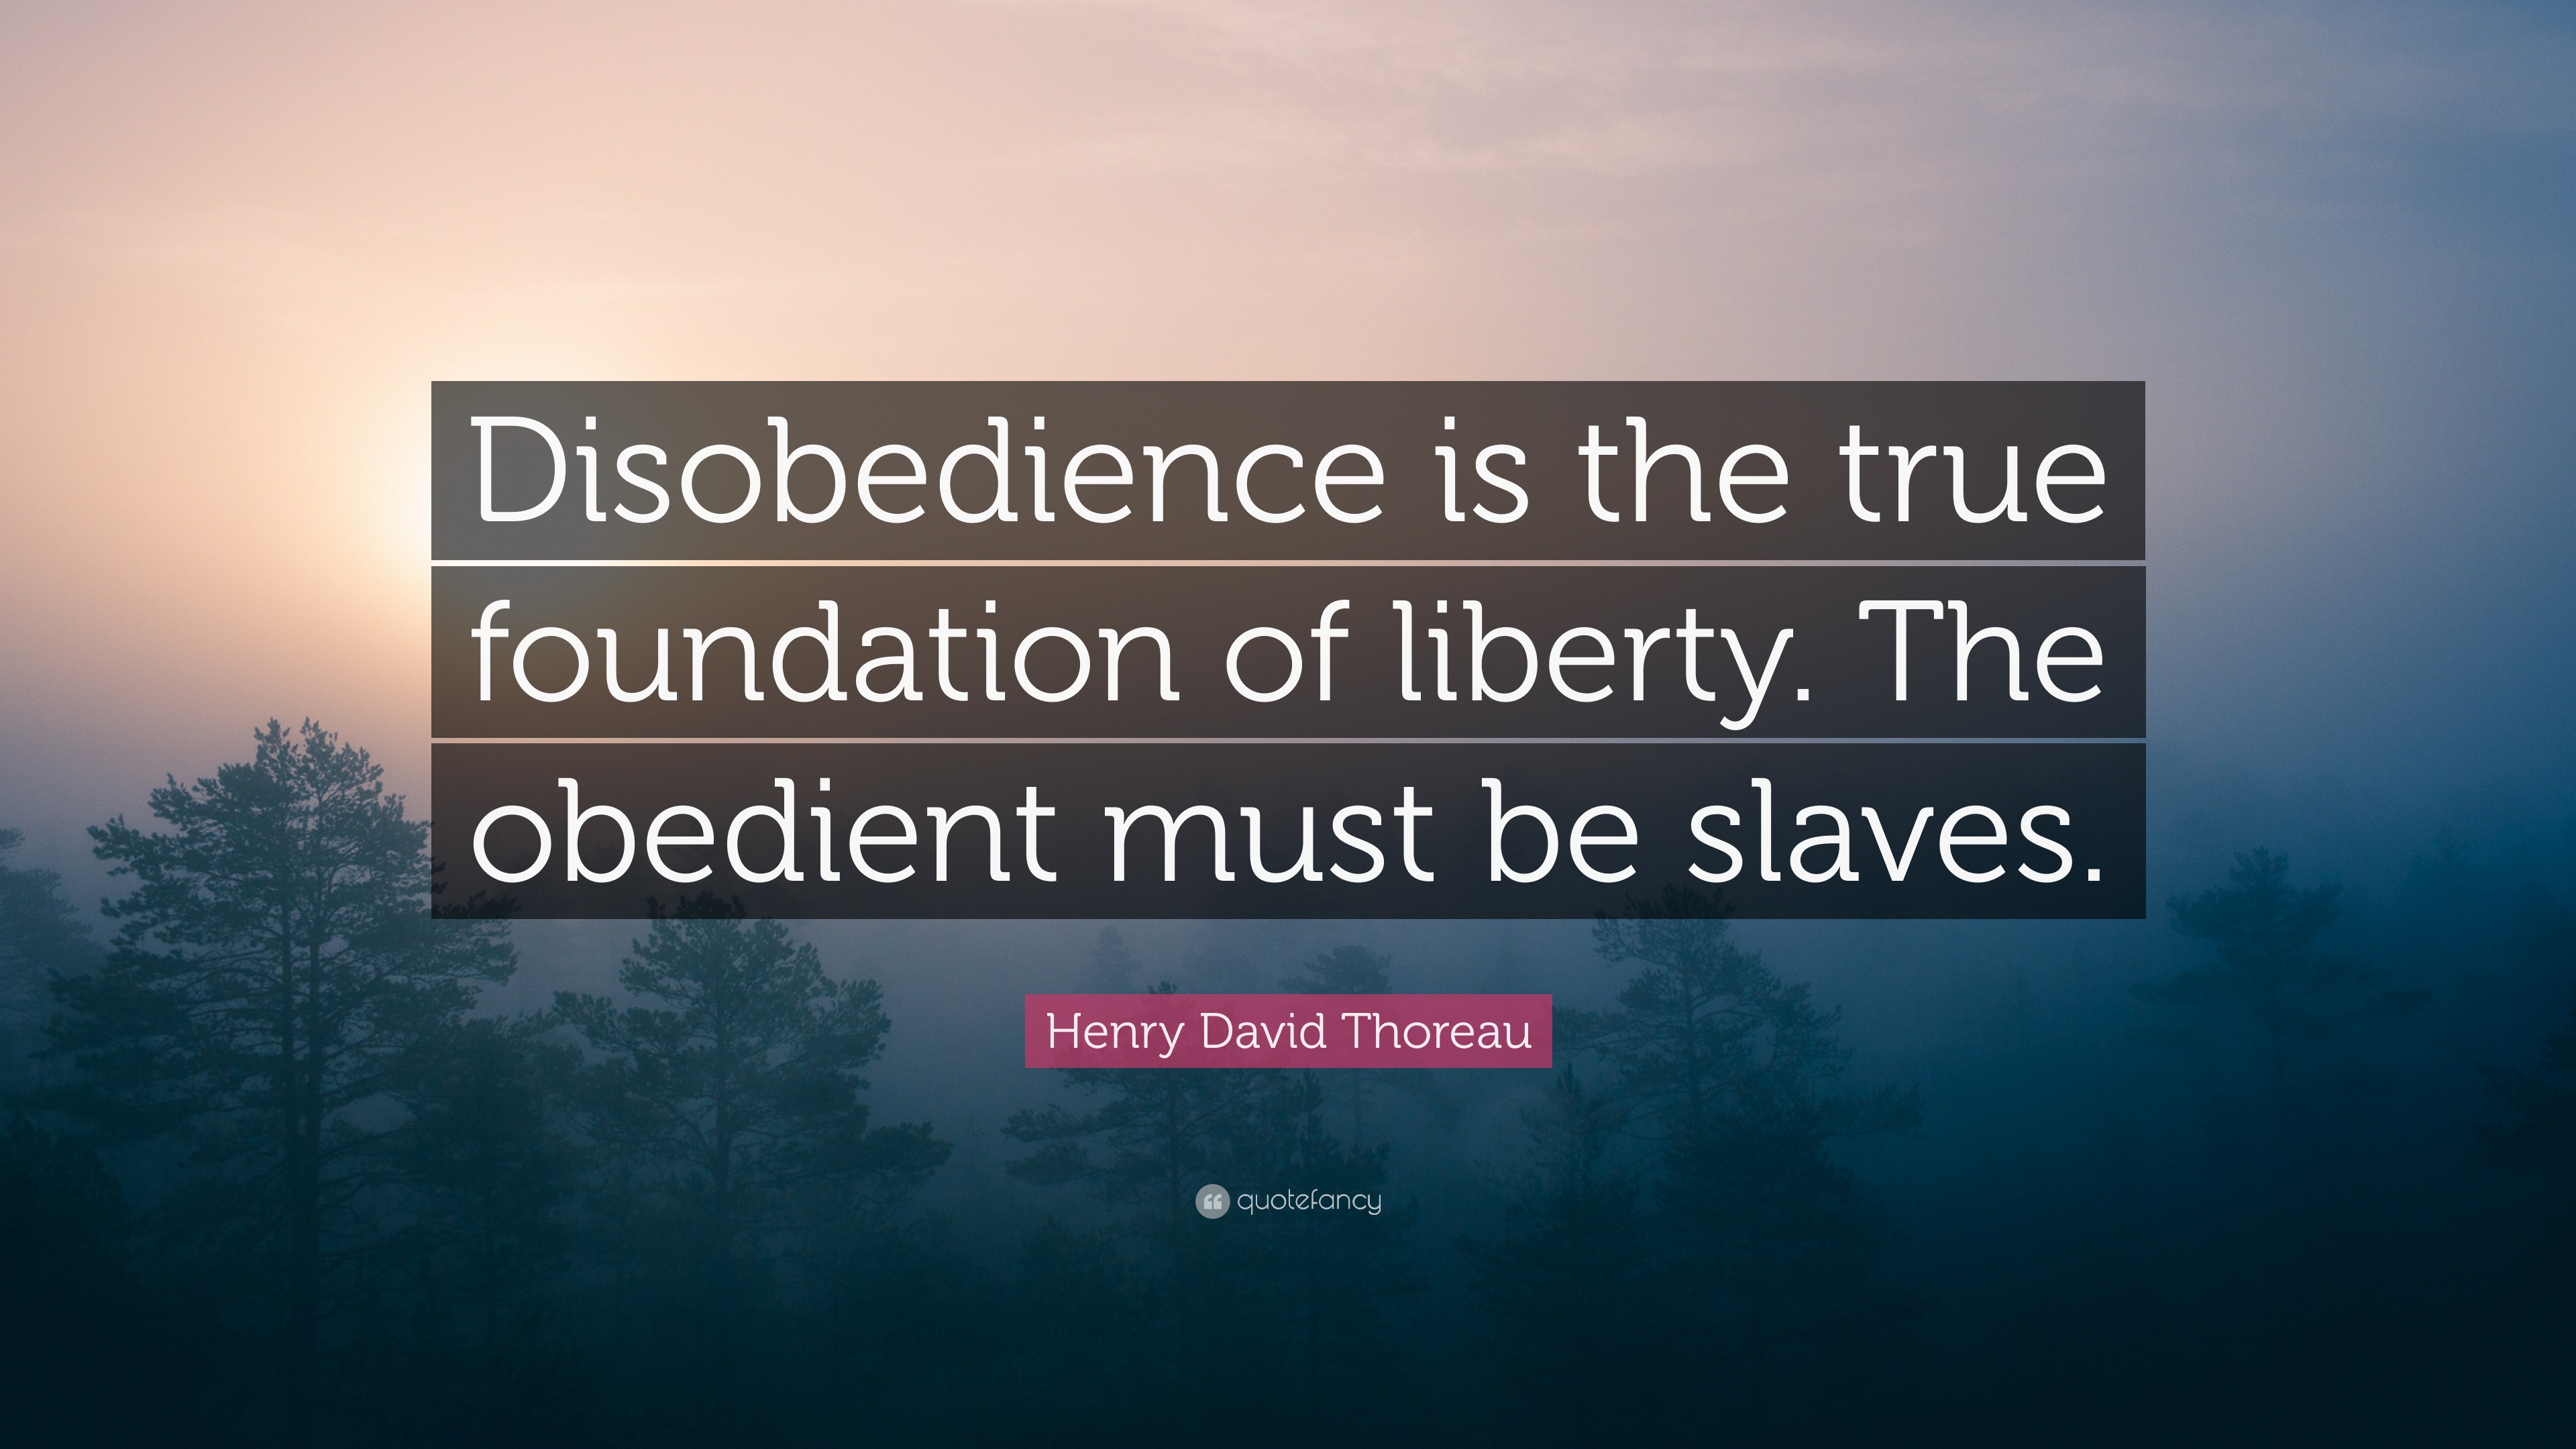 thoreau and civil disobedience